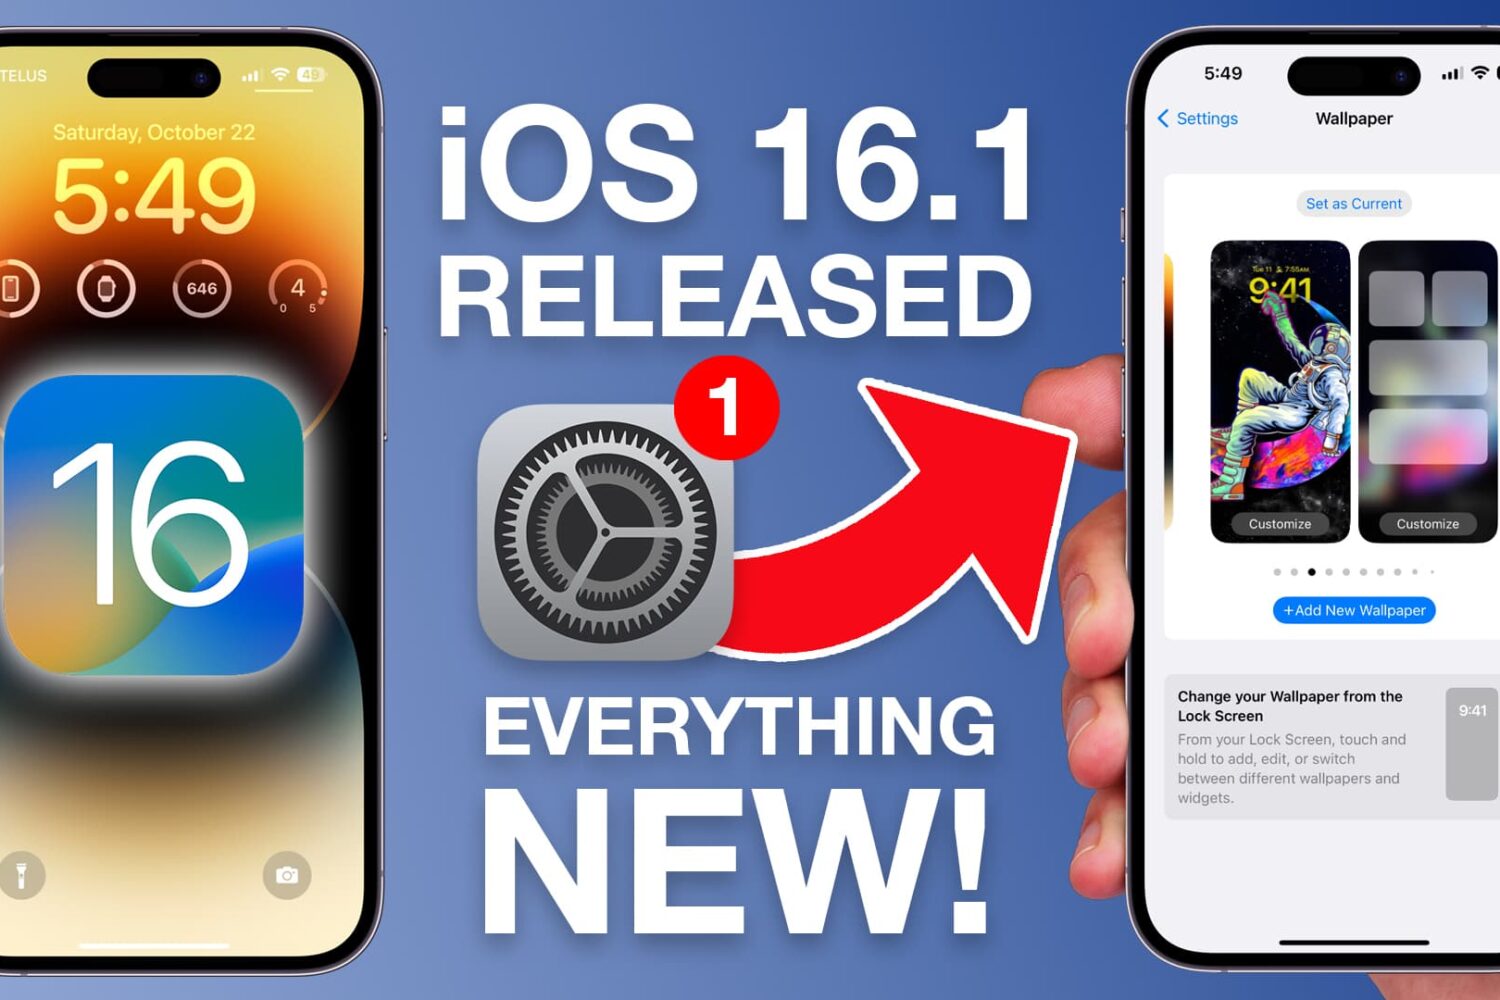 New iOS 16.1 features